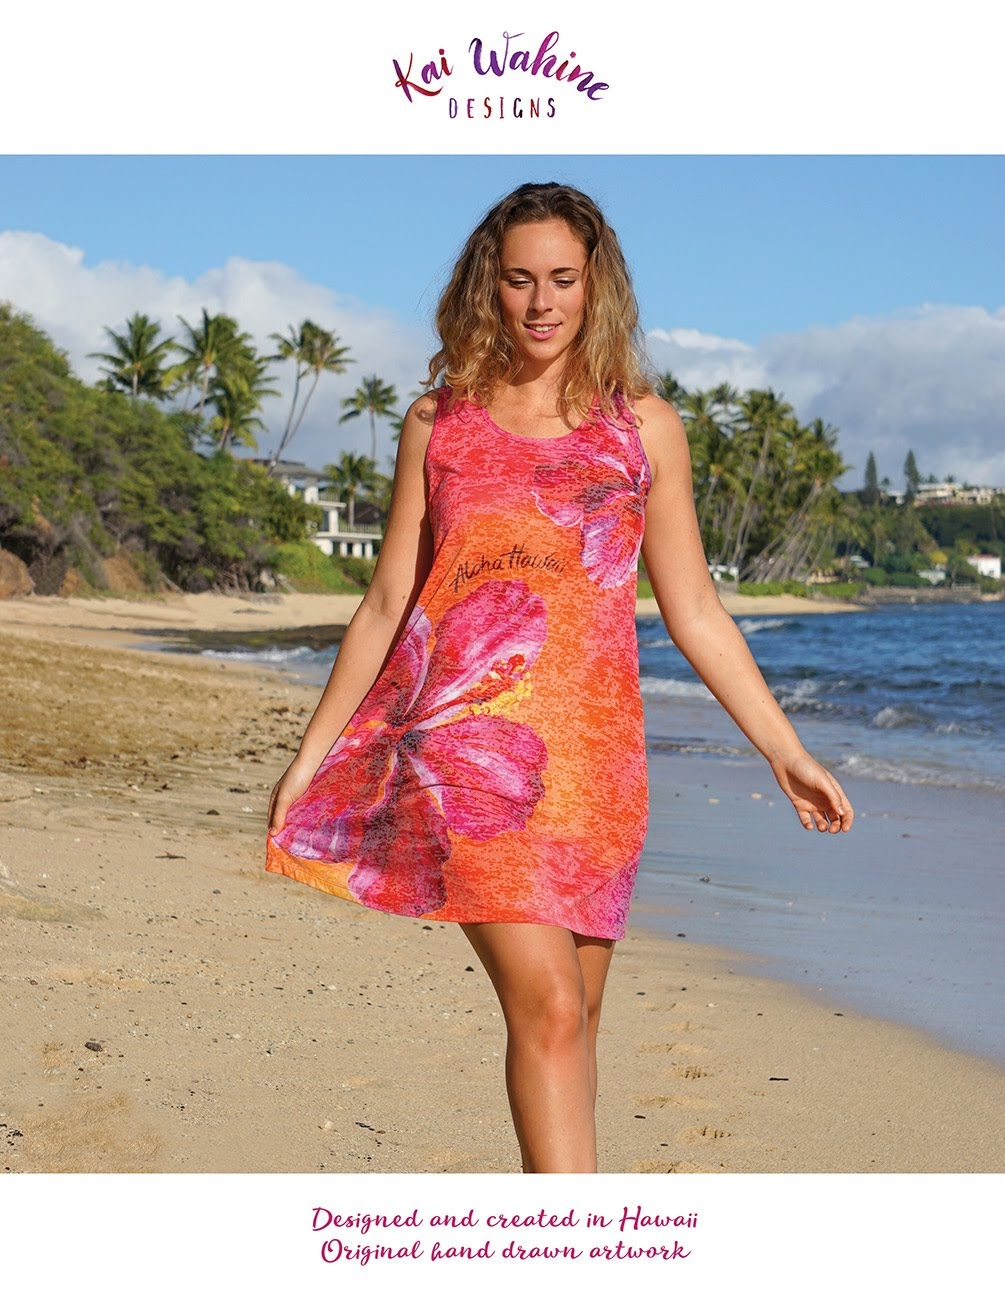 Women's Hawaii Designed and Printed Tank Coverups